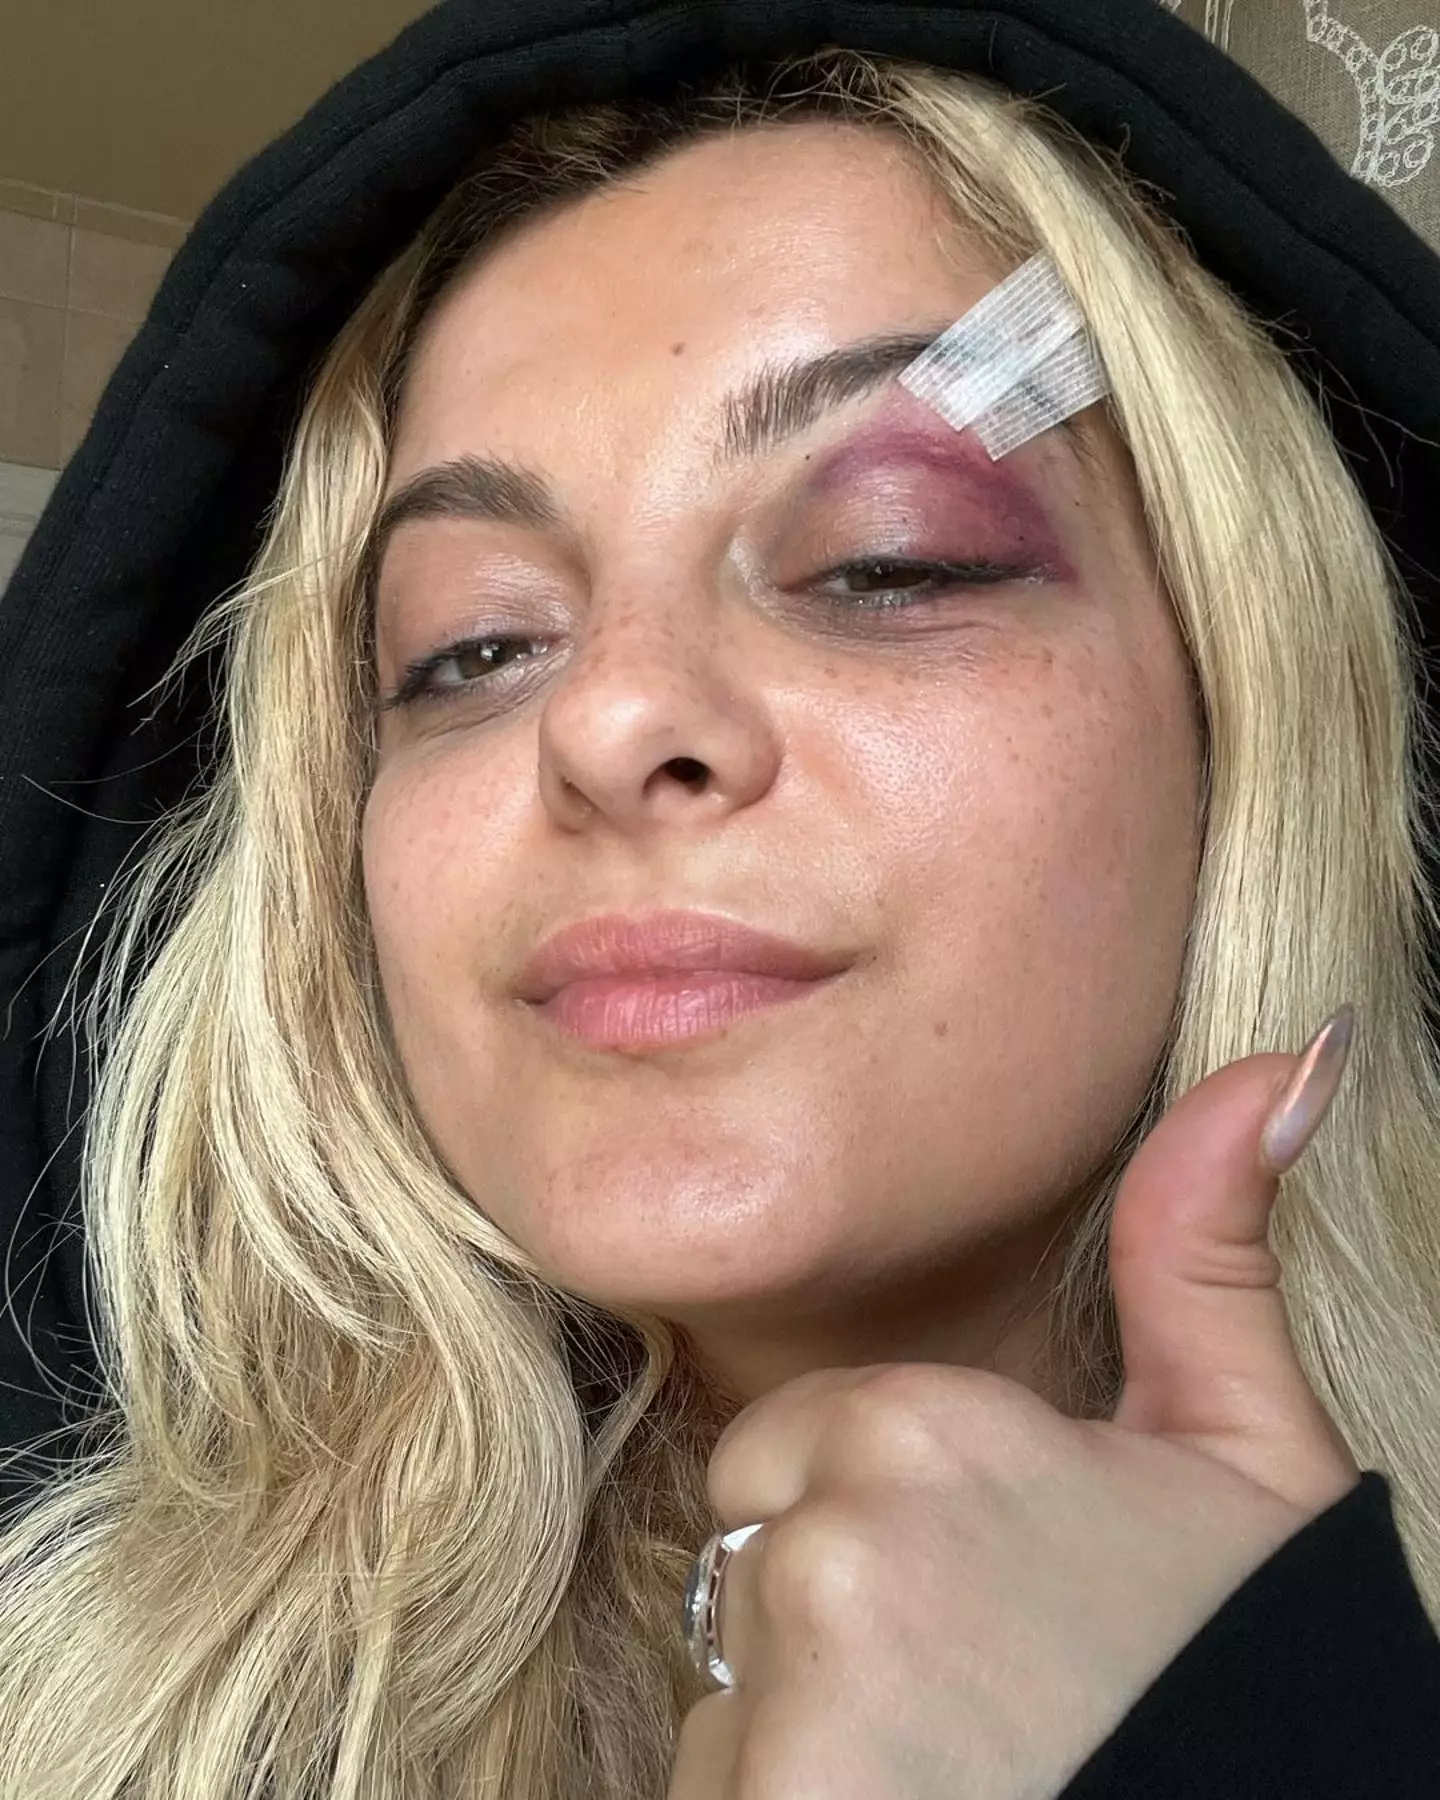 Bebe Rexha later shared two pictures of her injuries.